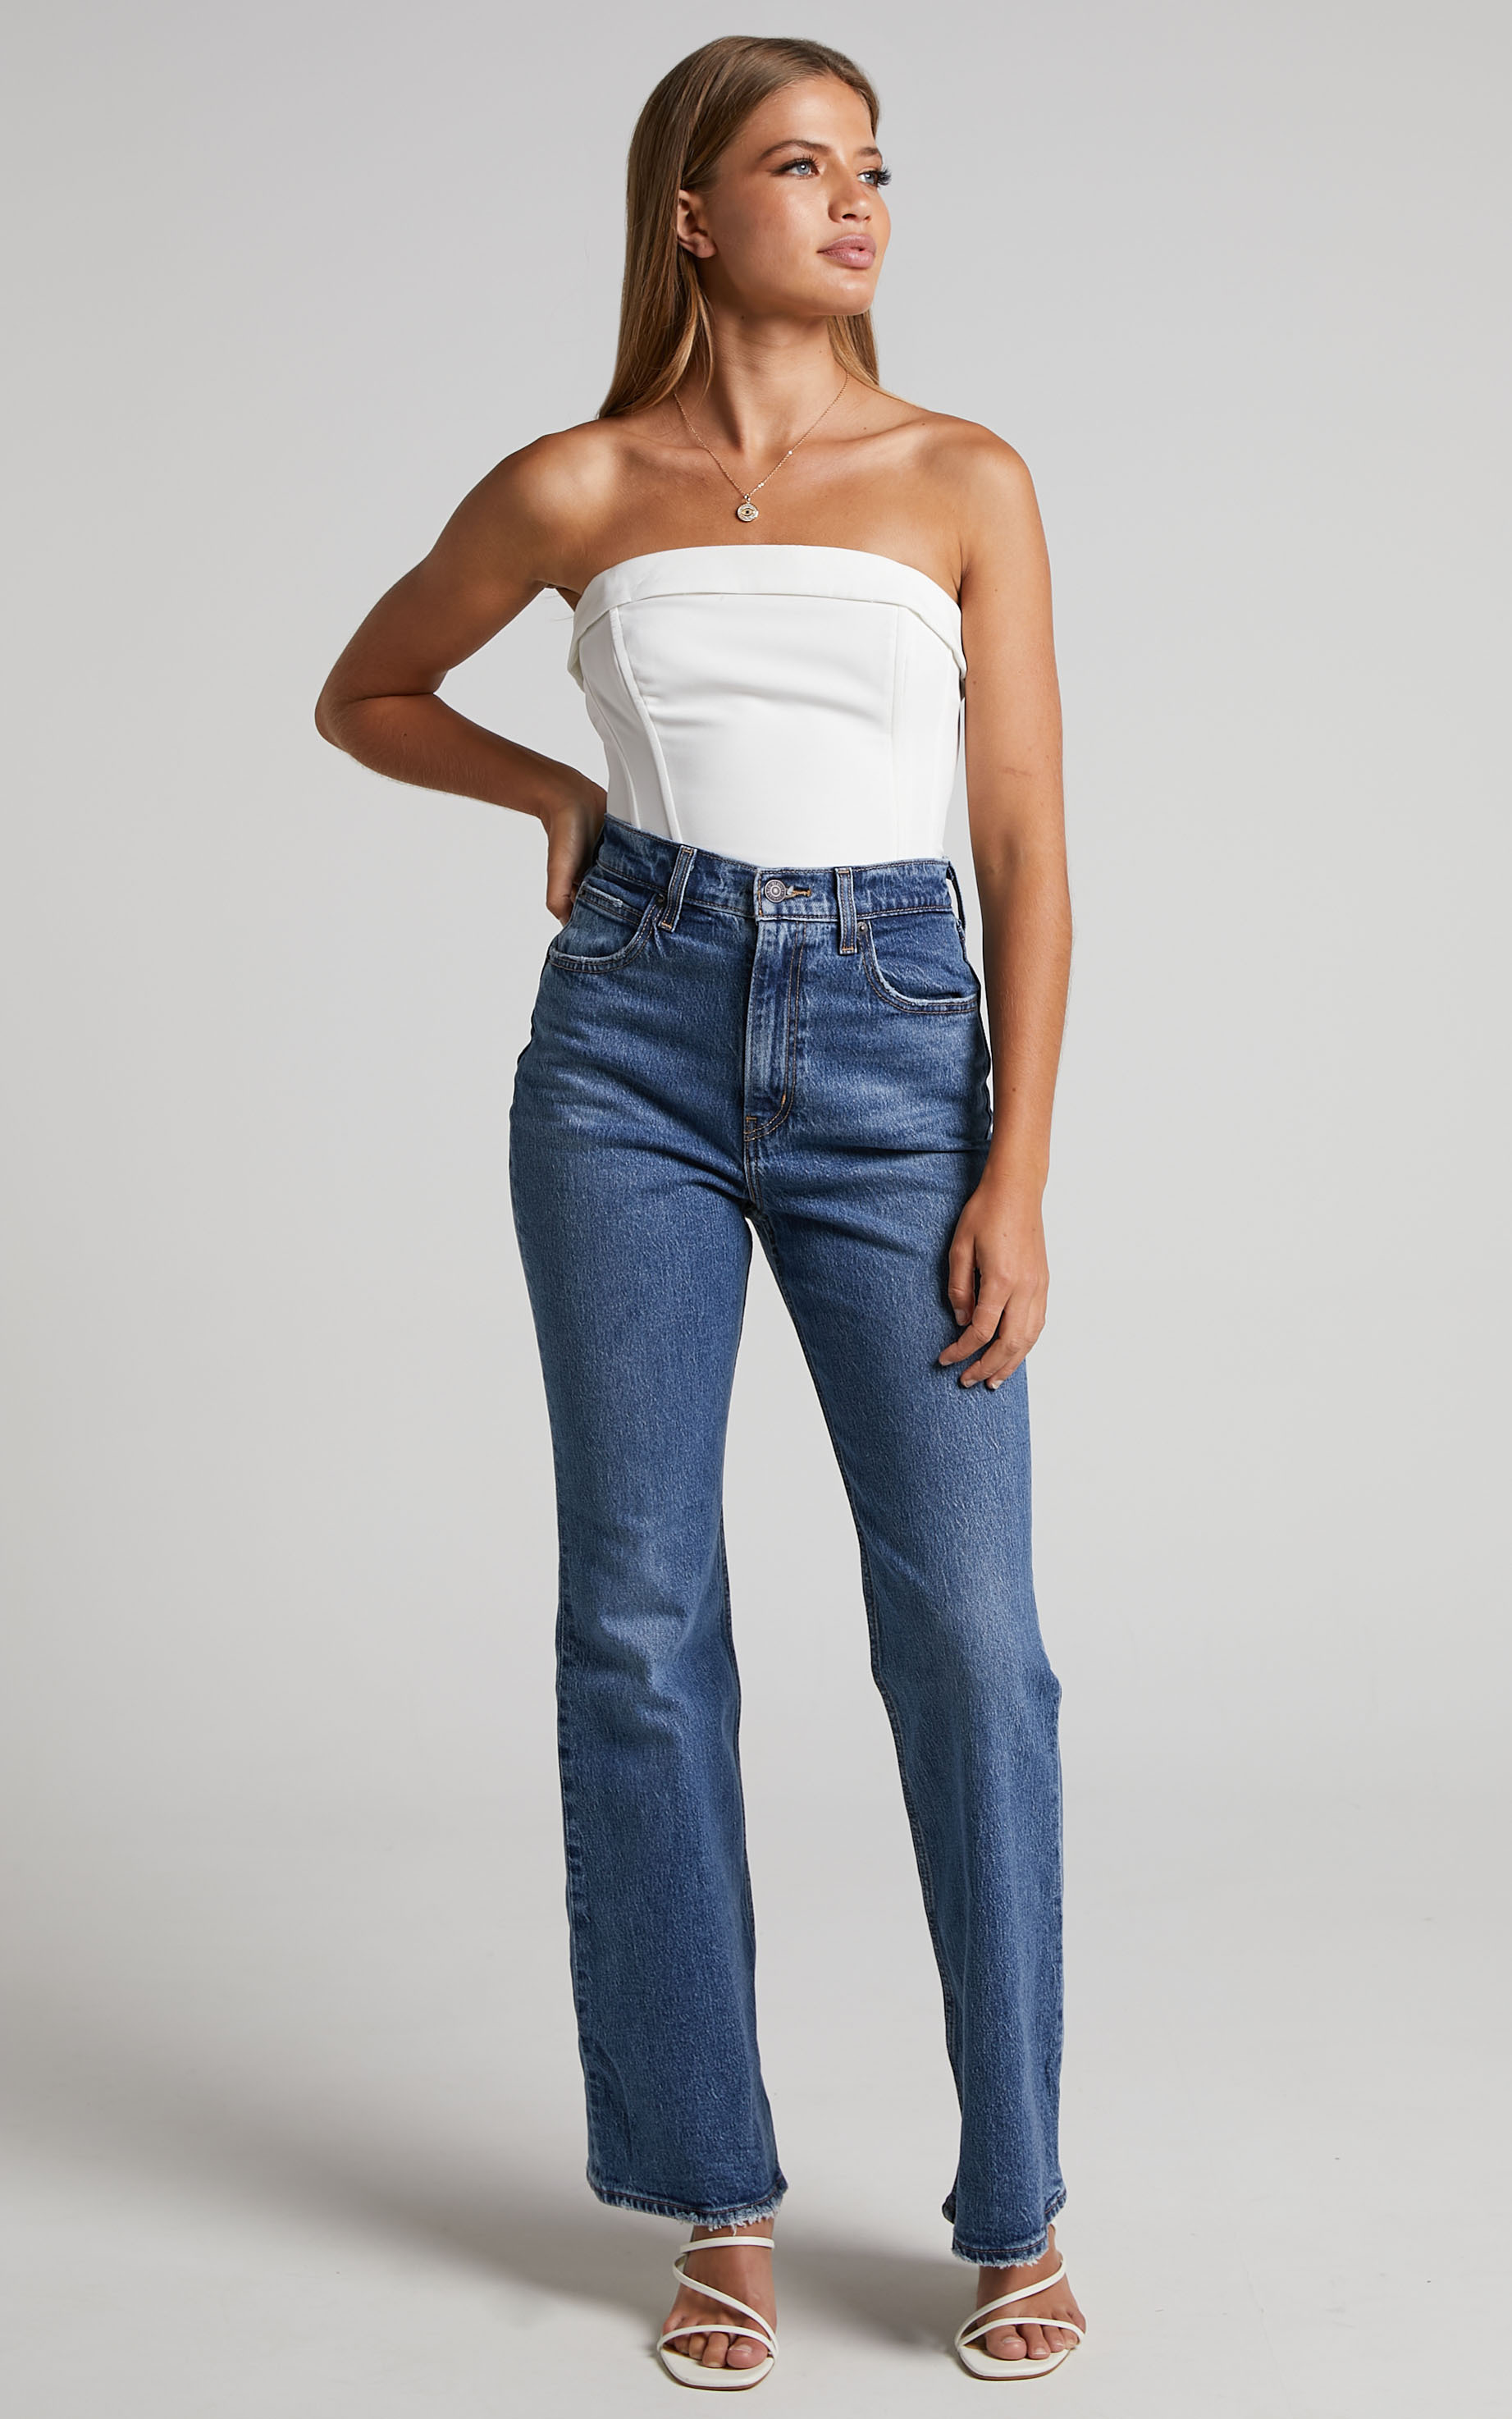 Levi's - 70s High Flare Jeans in SONOMA STEP - 06, BLU1, hi-res image number null